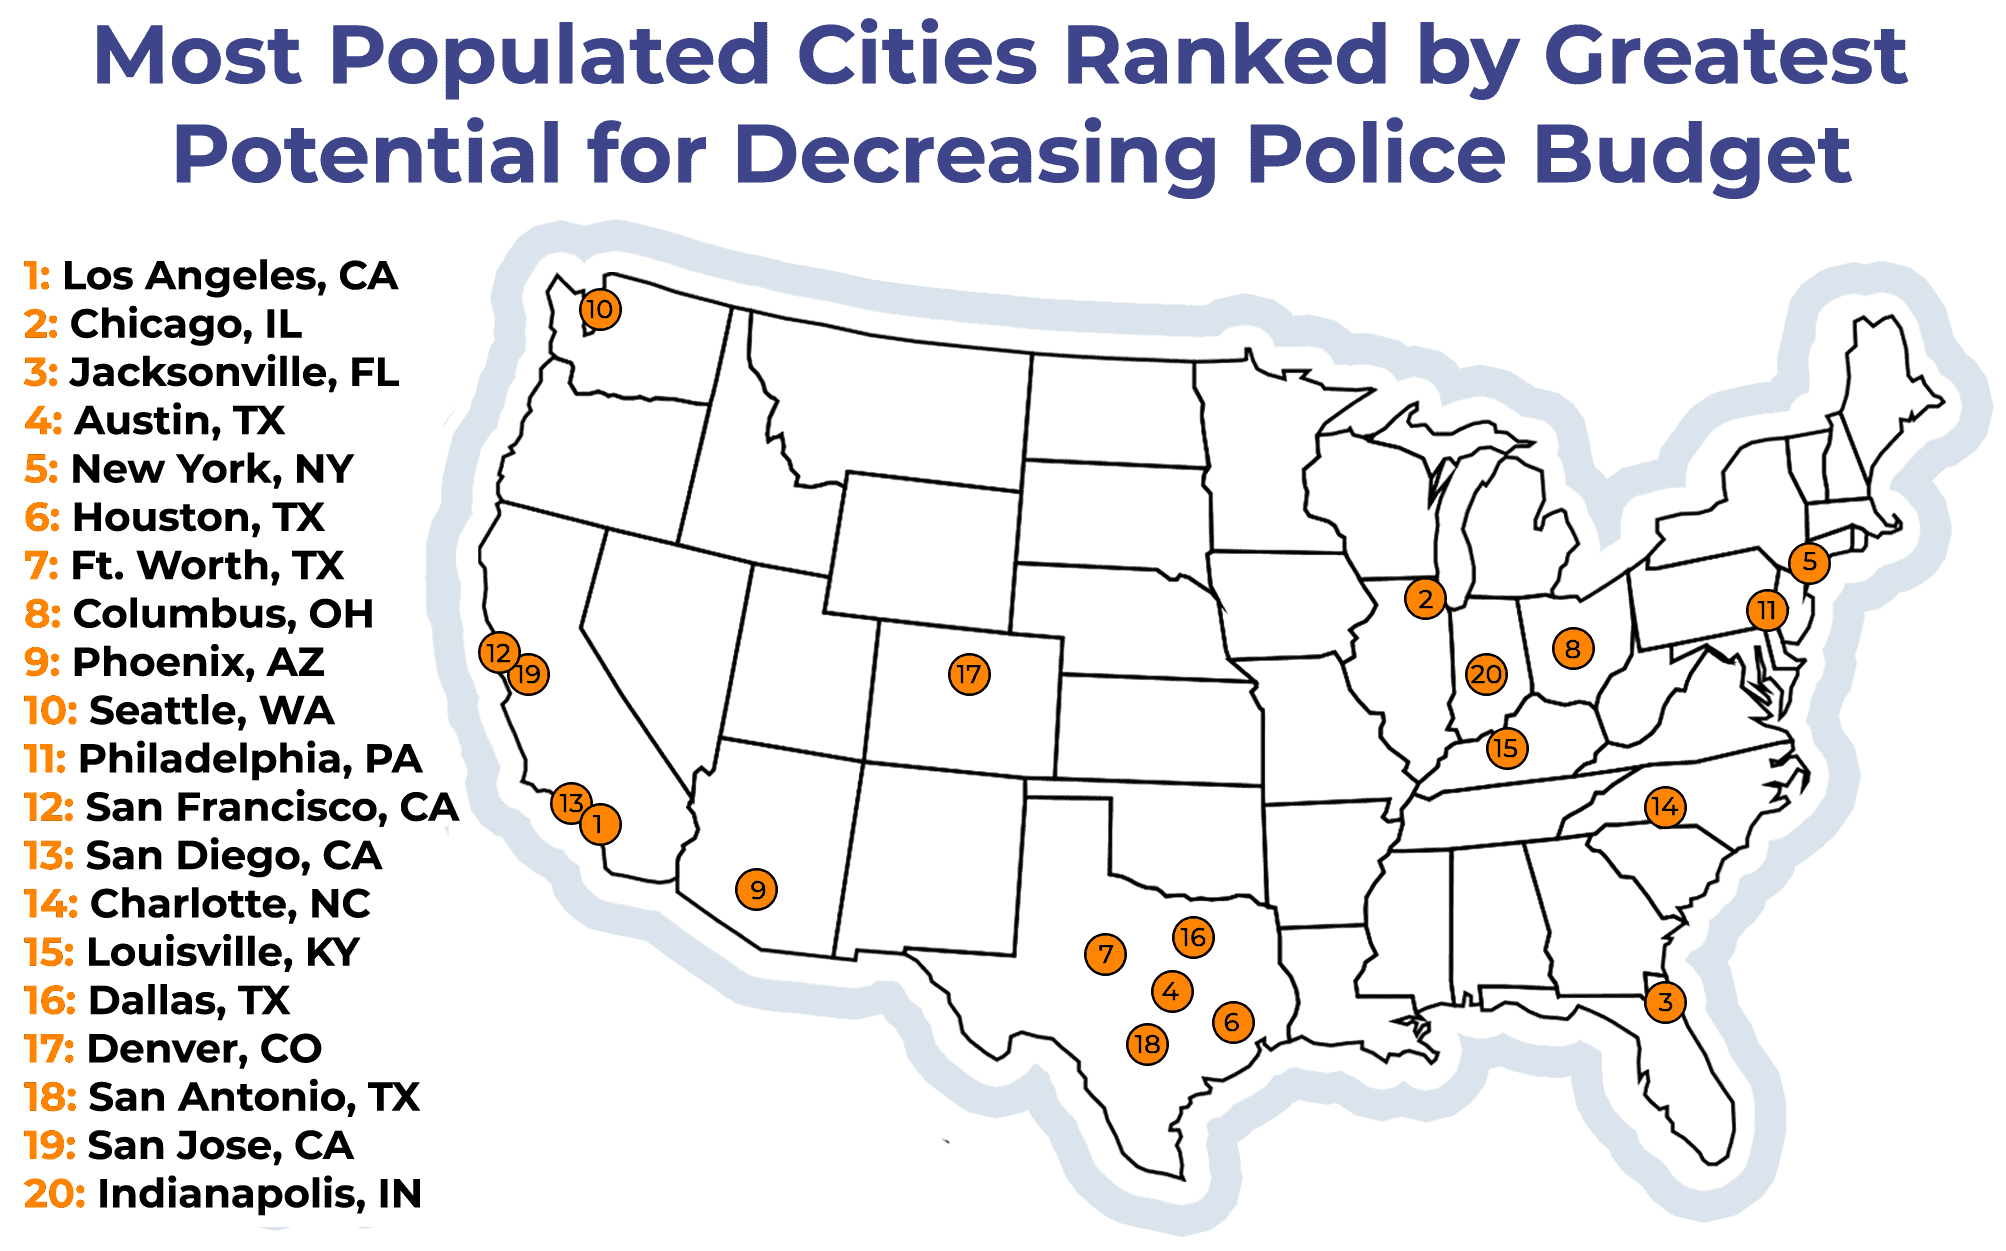 Ranking of 20 most populated cities for greatest potential for decreasing police budget